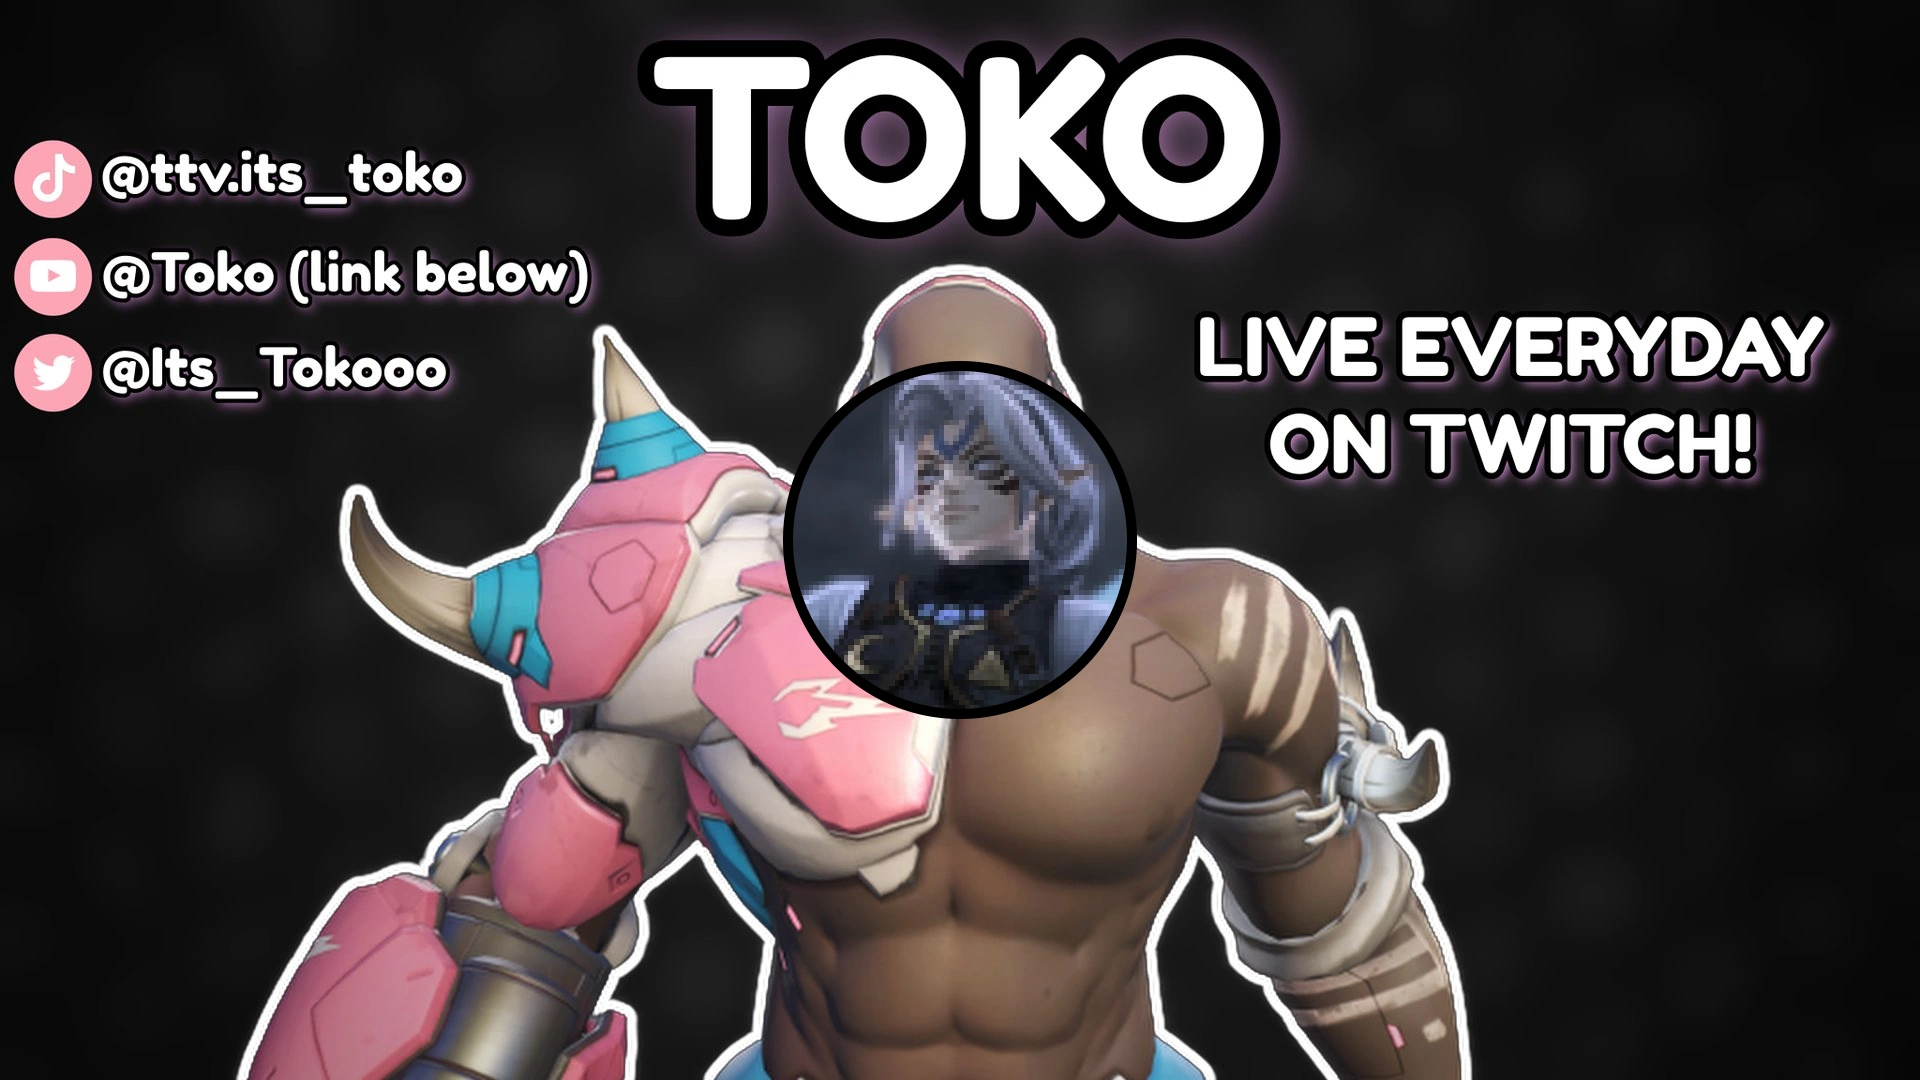 Its_Toko Twitch